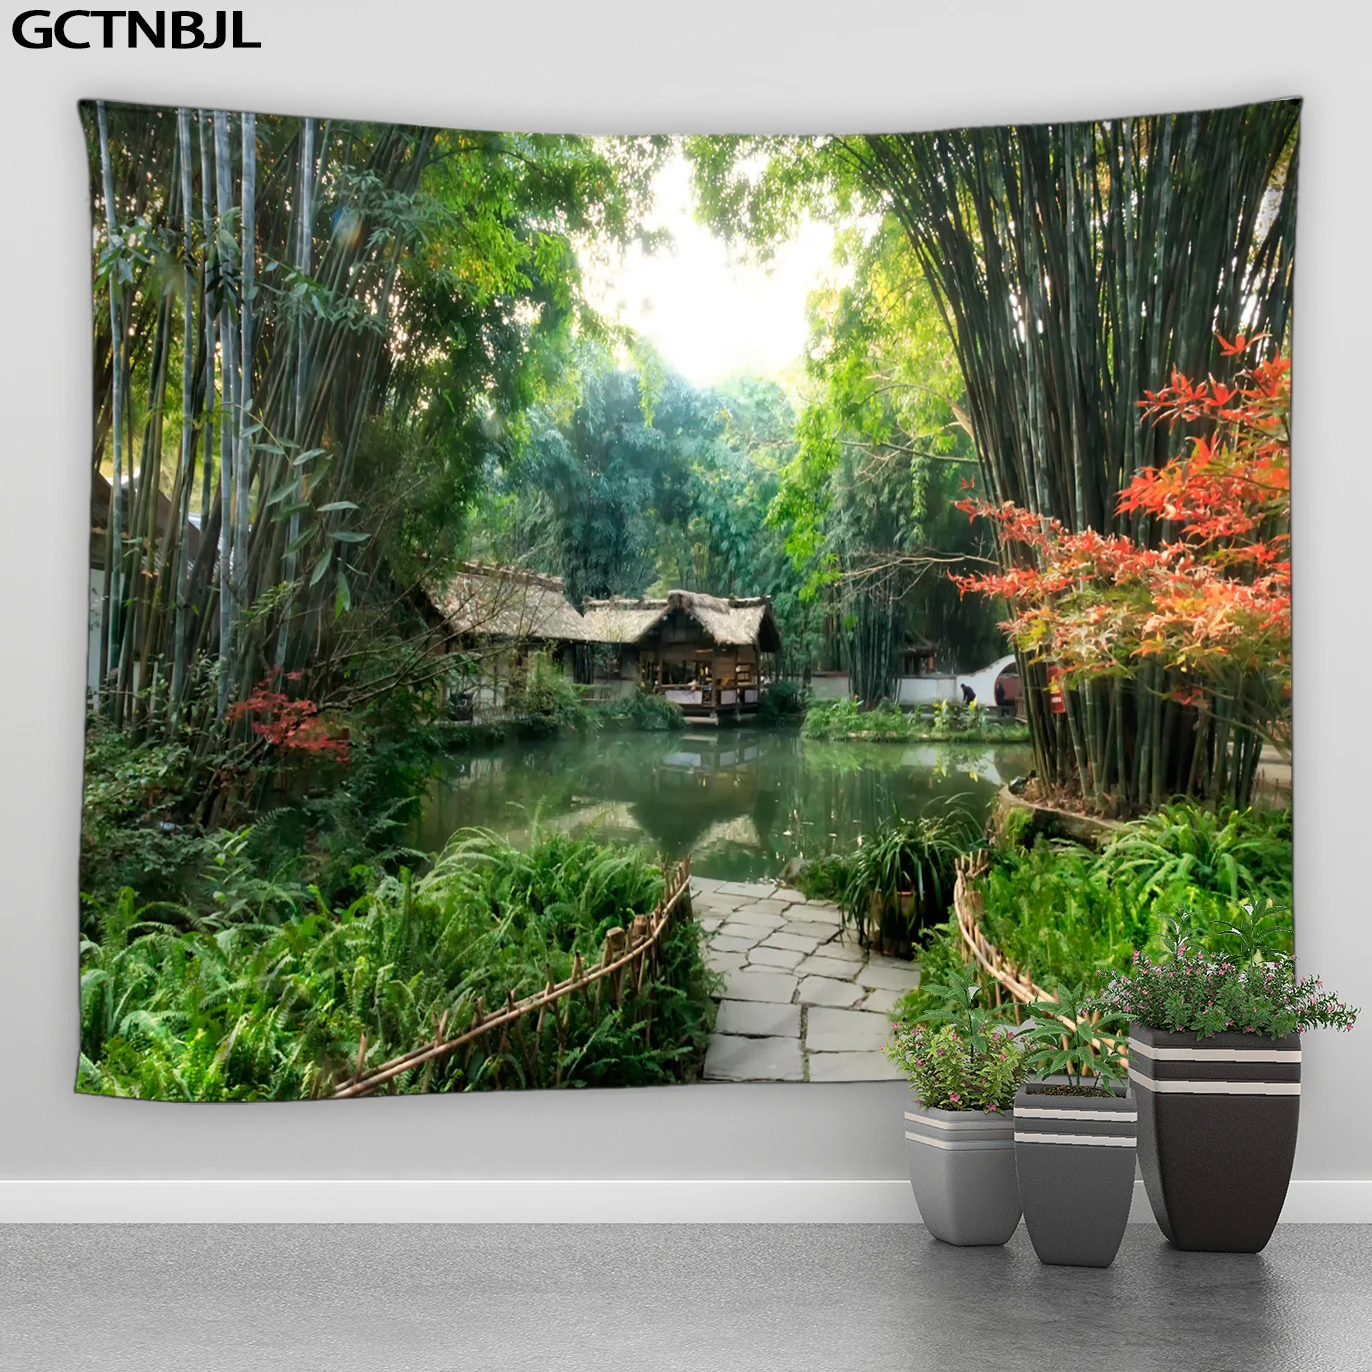 

Bamboo Forest Garden Scenery Tapestry Wall Hanging Park Spring Nature Landscape Waterfall Aesthetic Tapestries for Home Decor